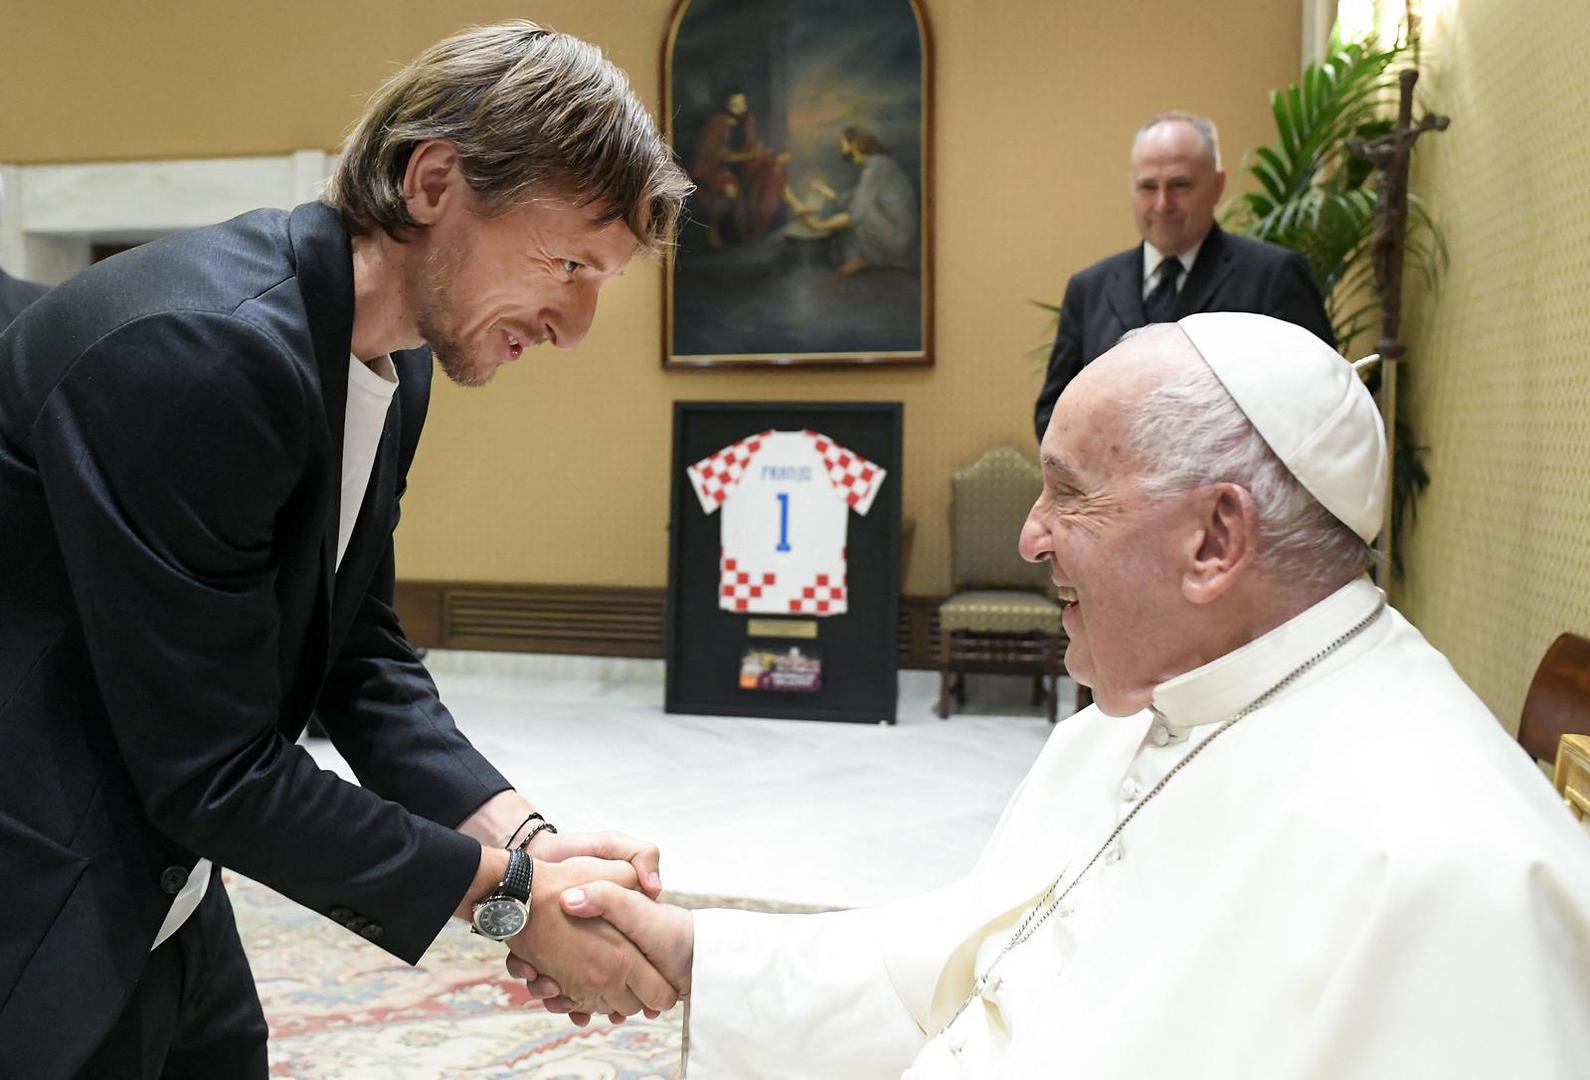 Pope Francis greets Croatian player Luka Modric at the end of a meeting with the players of the Croatian National Football Team during a private audience at the Vatican on June 5, 2024. The Pope praised the Croatian team for their achievements, such as their third-place finish at the last World Cup in Qatar. The Croatians also received his blessing ahead of Euro 2024, which will soon be hosted by Germany. Photo: (EV) Vatican Media/ABACAPRESS.COM Photo: ABACA/ABACA